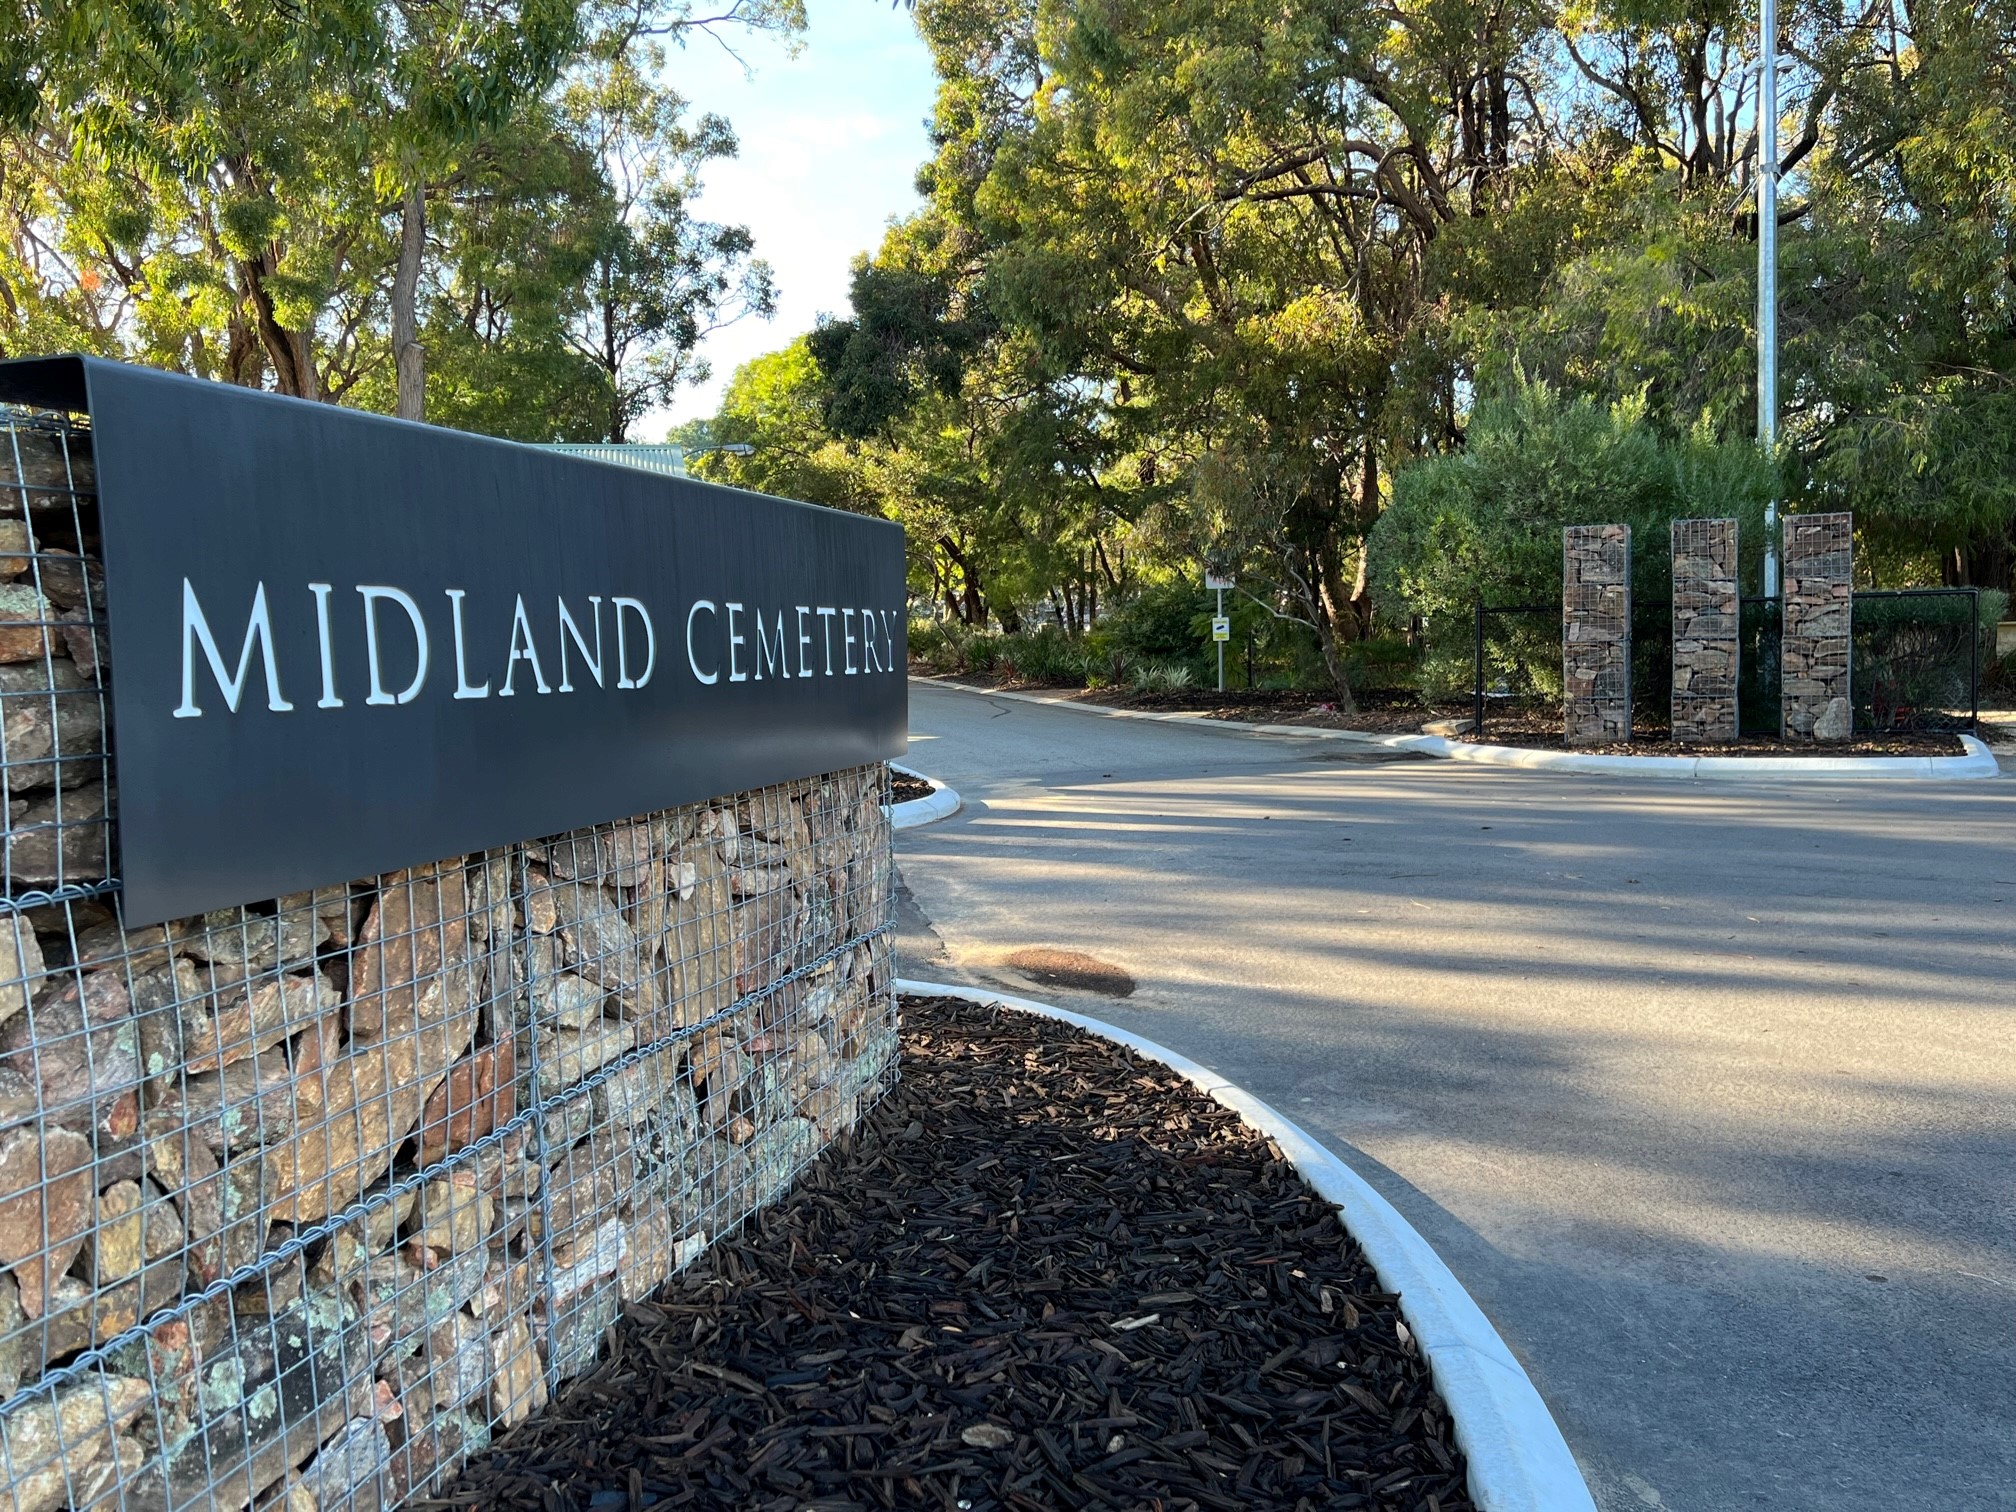 Midland Cemetery sign and gabion wall and pillars